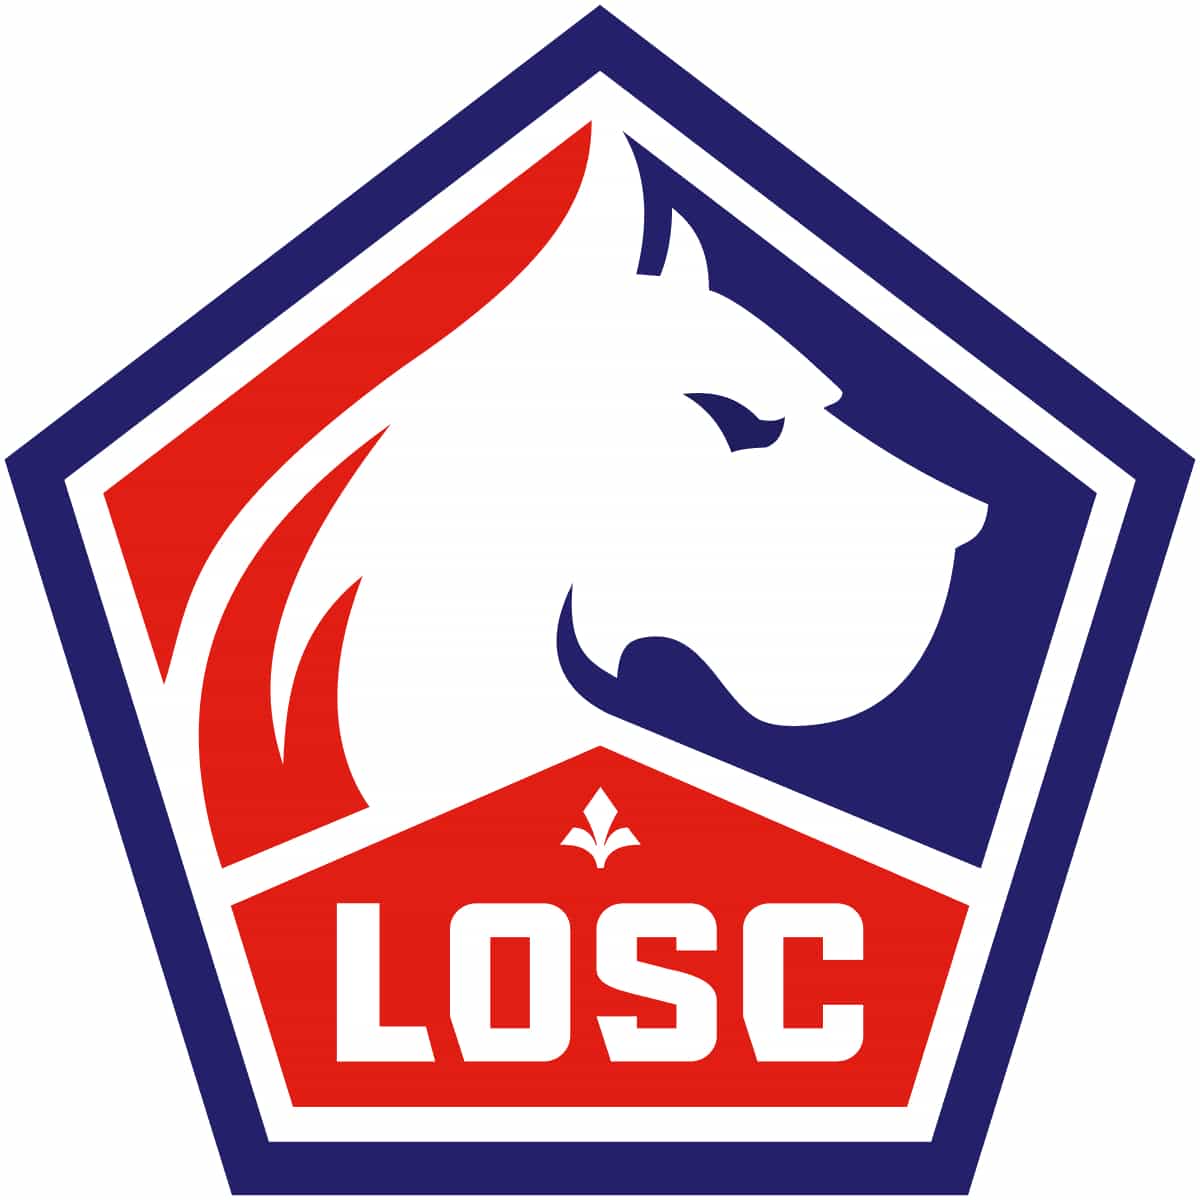 Watch Lille games live online for free